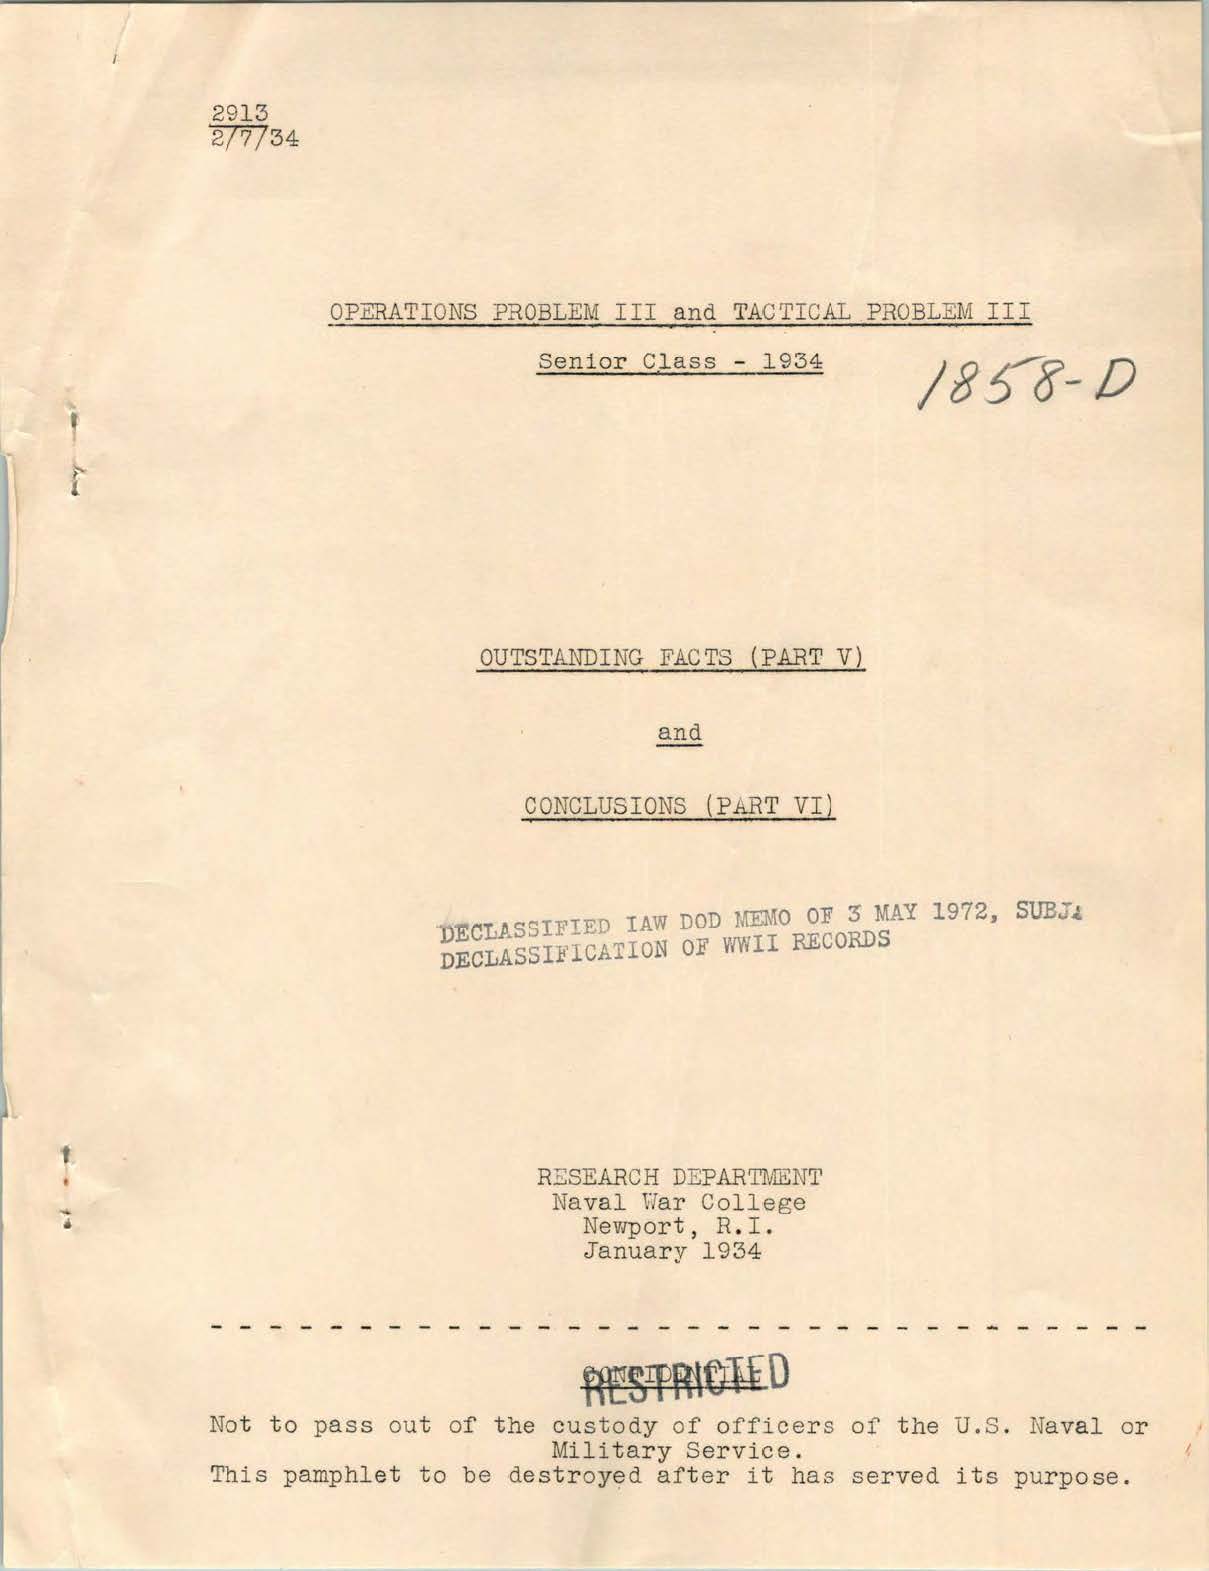 Operations Problem III and Tactical Problem III: Outstanding Facts and Conclusions, Senior Class of 1934